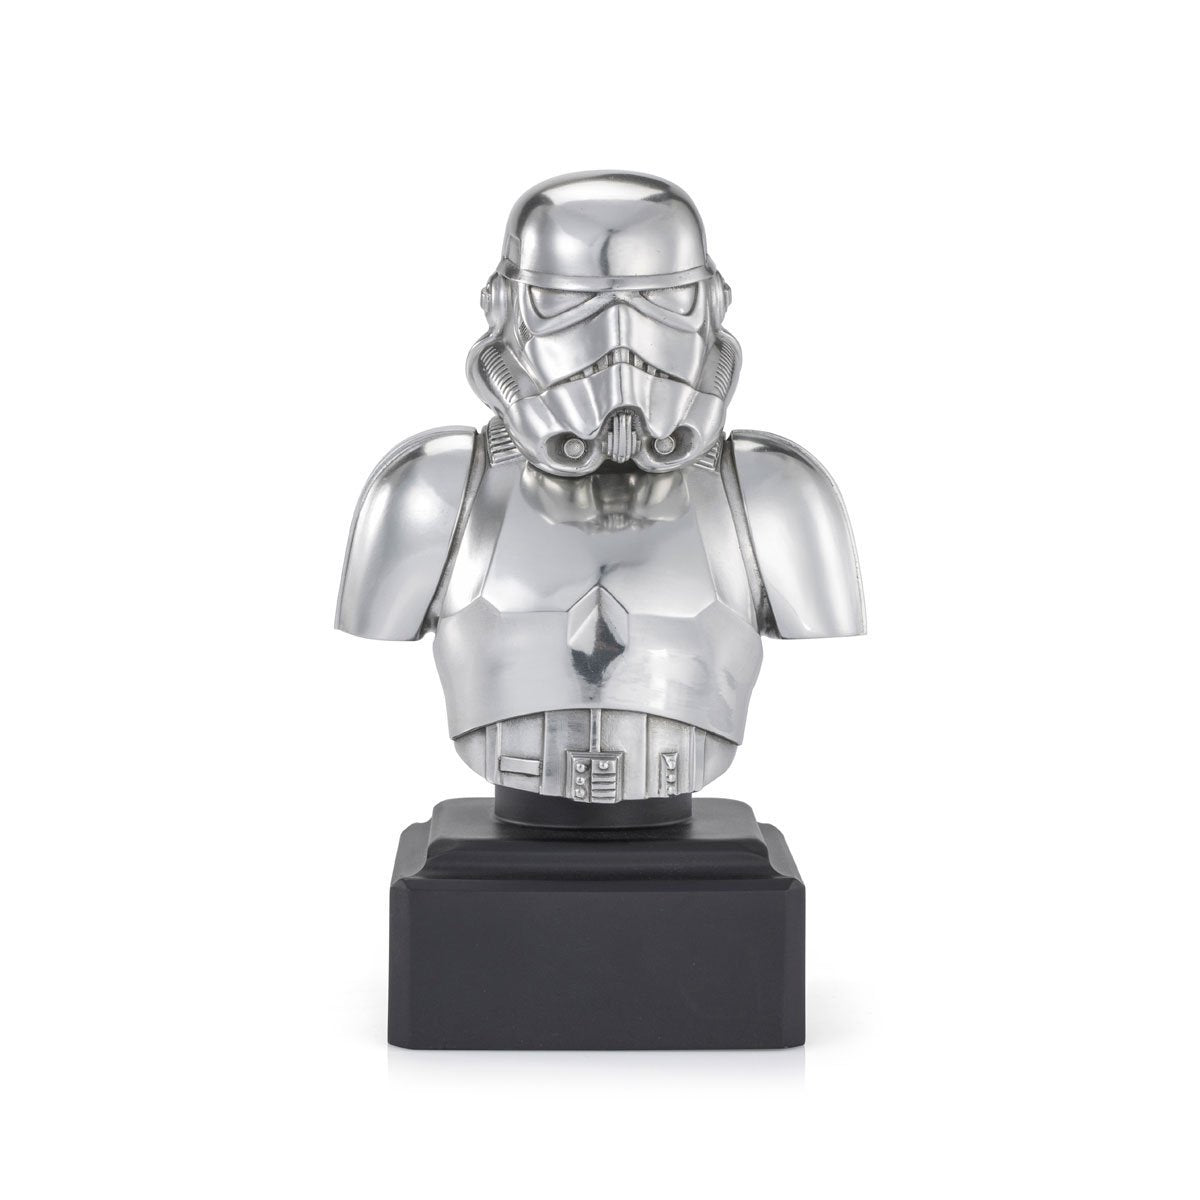 Star Wars Stormtrooper Limited Edition Bust - Collectible Gift